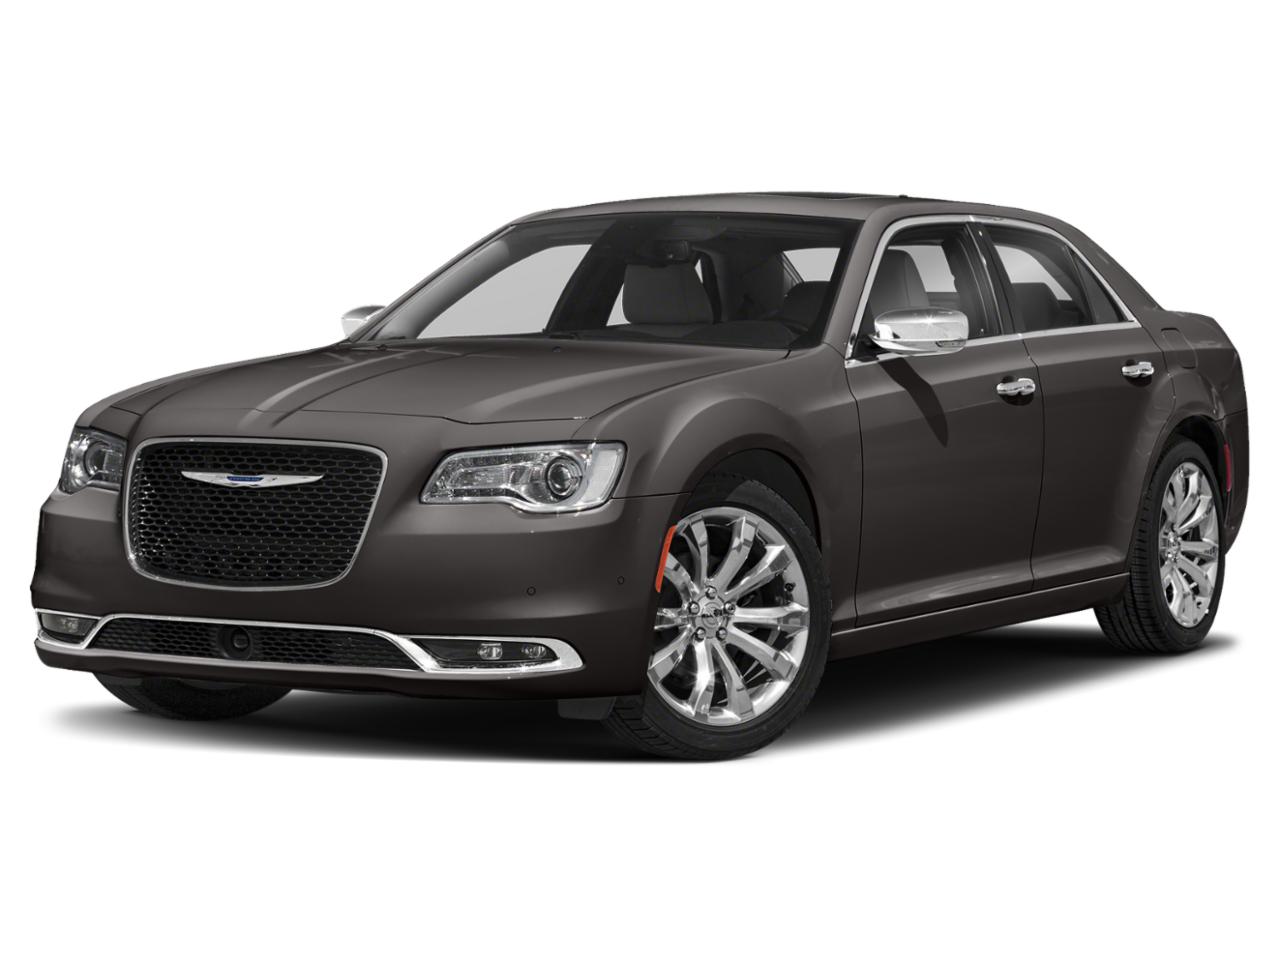 2020 Chrysler 300 Vehicle Photo in Grapevine, TX 76051